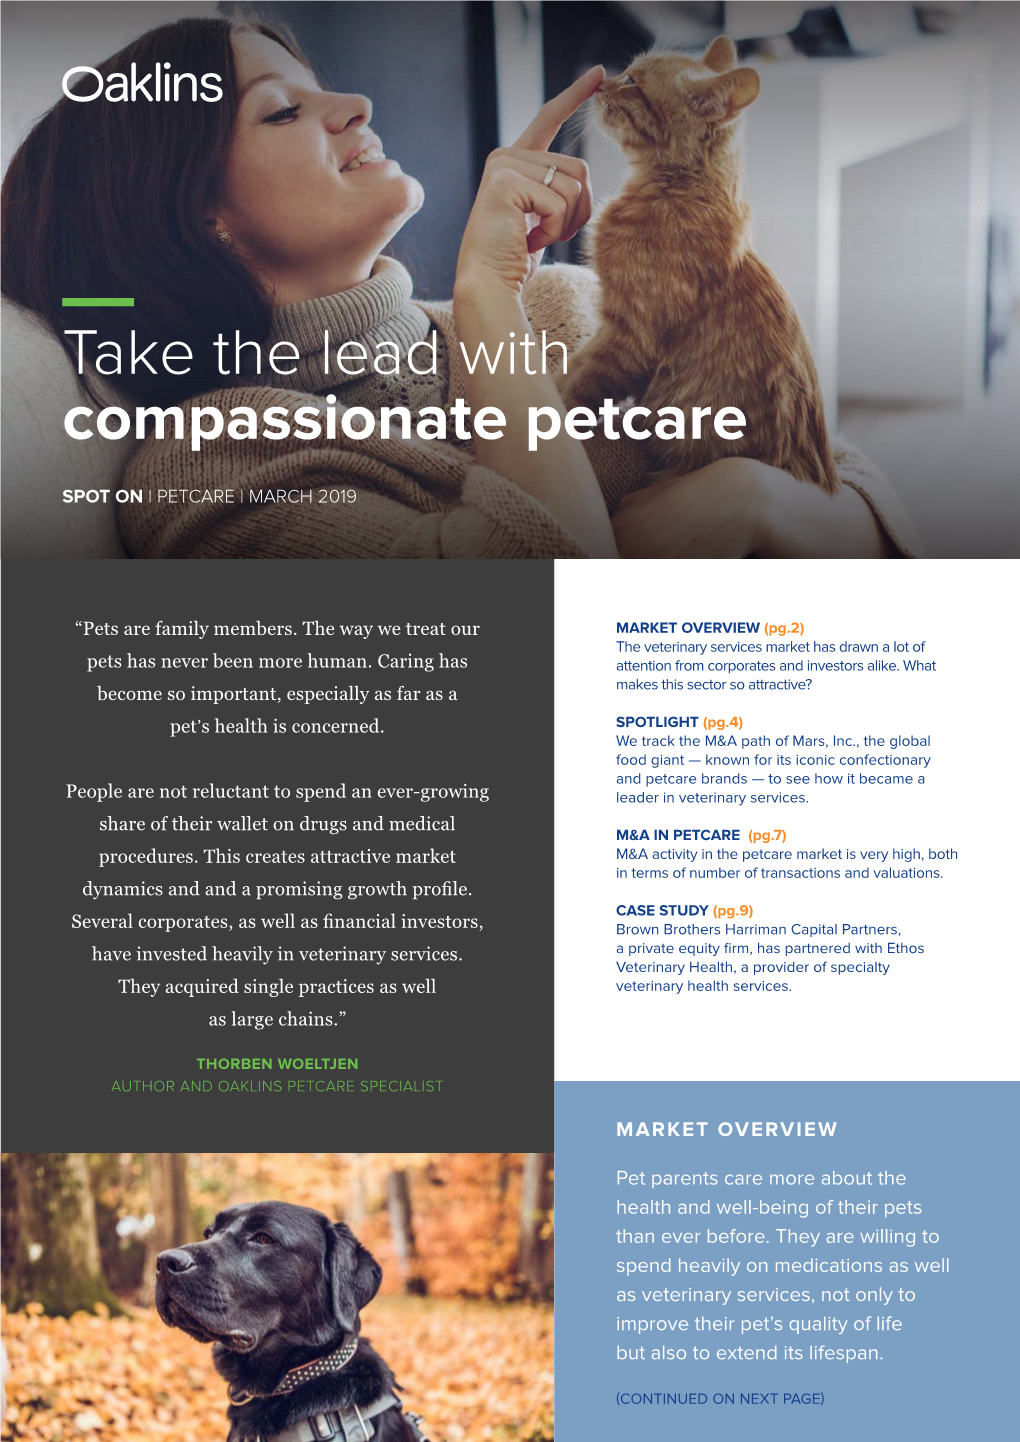 Take the Lead with Compassionate Petcare